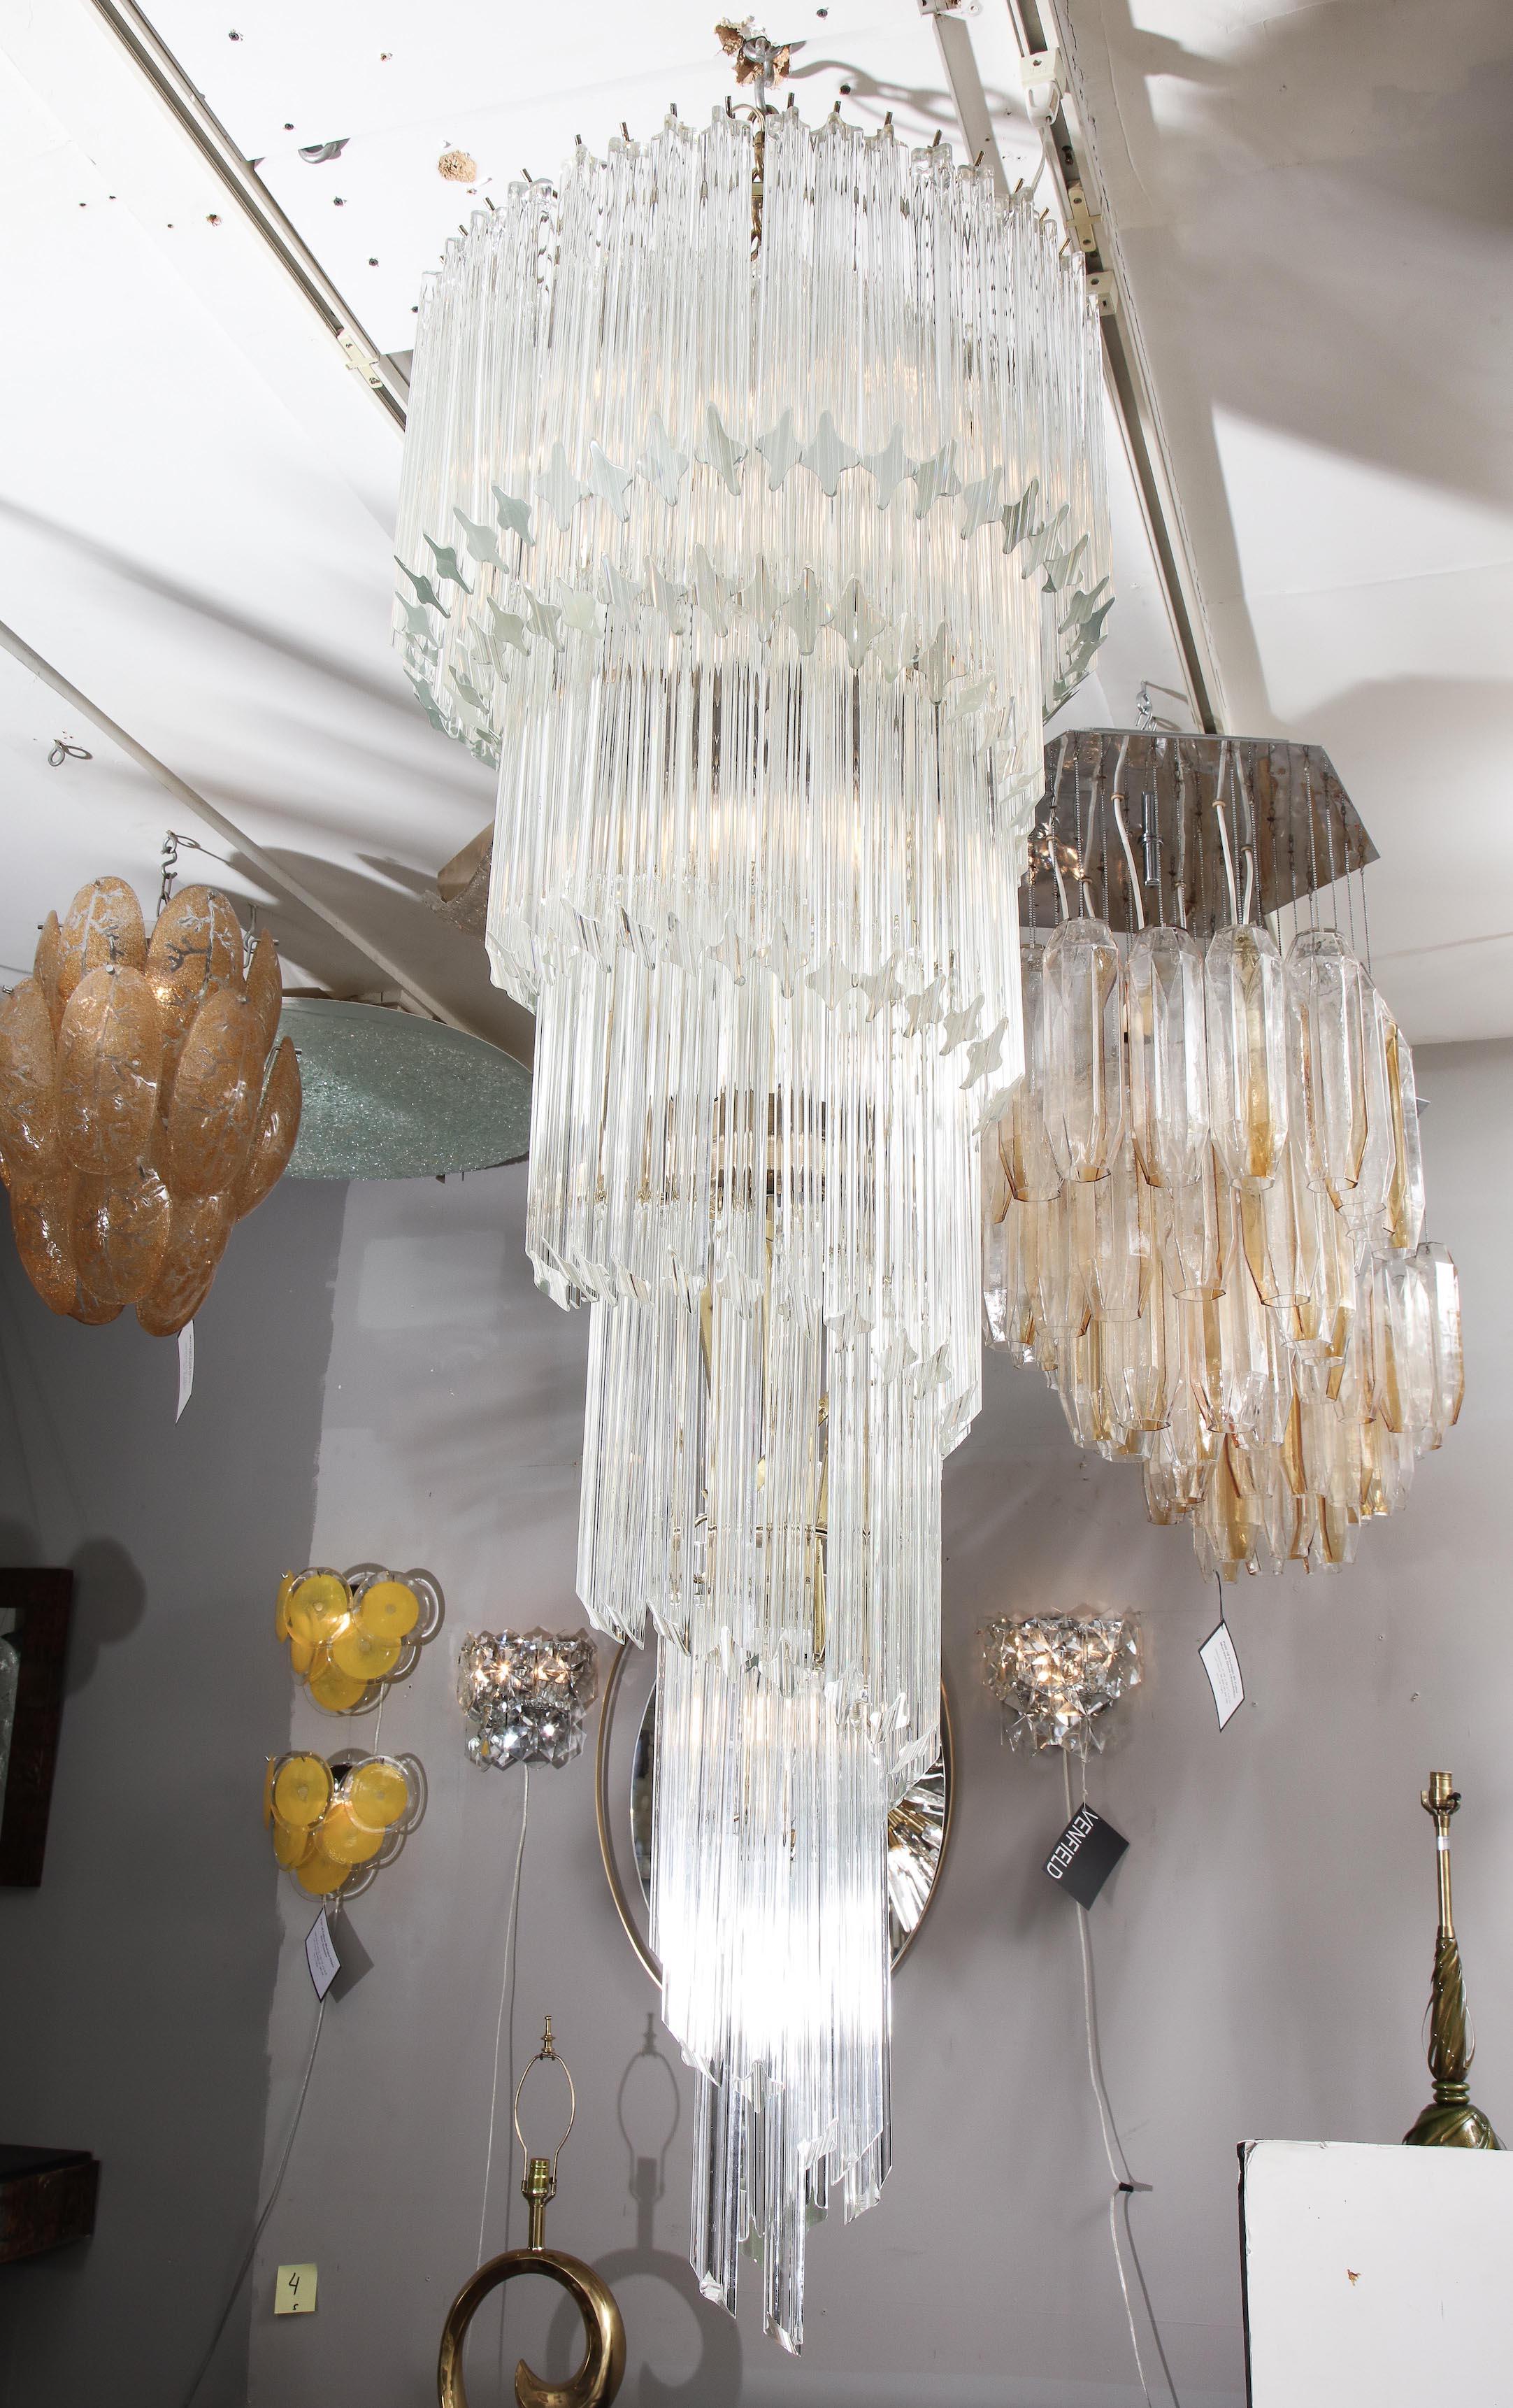 Glamorous vintage quadriedri Venini glass spiral chandelier from 1970s. It is a beautiful cascading 6 tiered chandelier with clear quadriedri glass pieces that creates statuesque silhouette and spiral motion. The frame is in light brass finish and